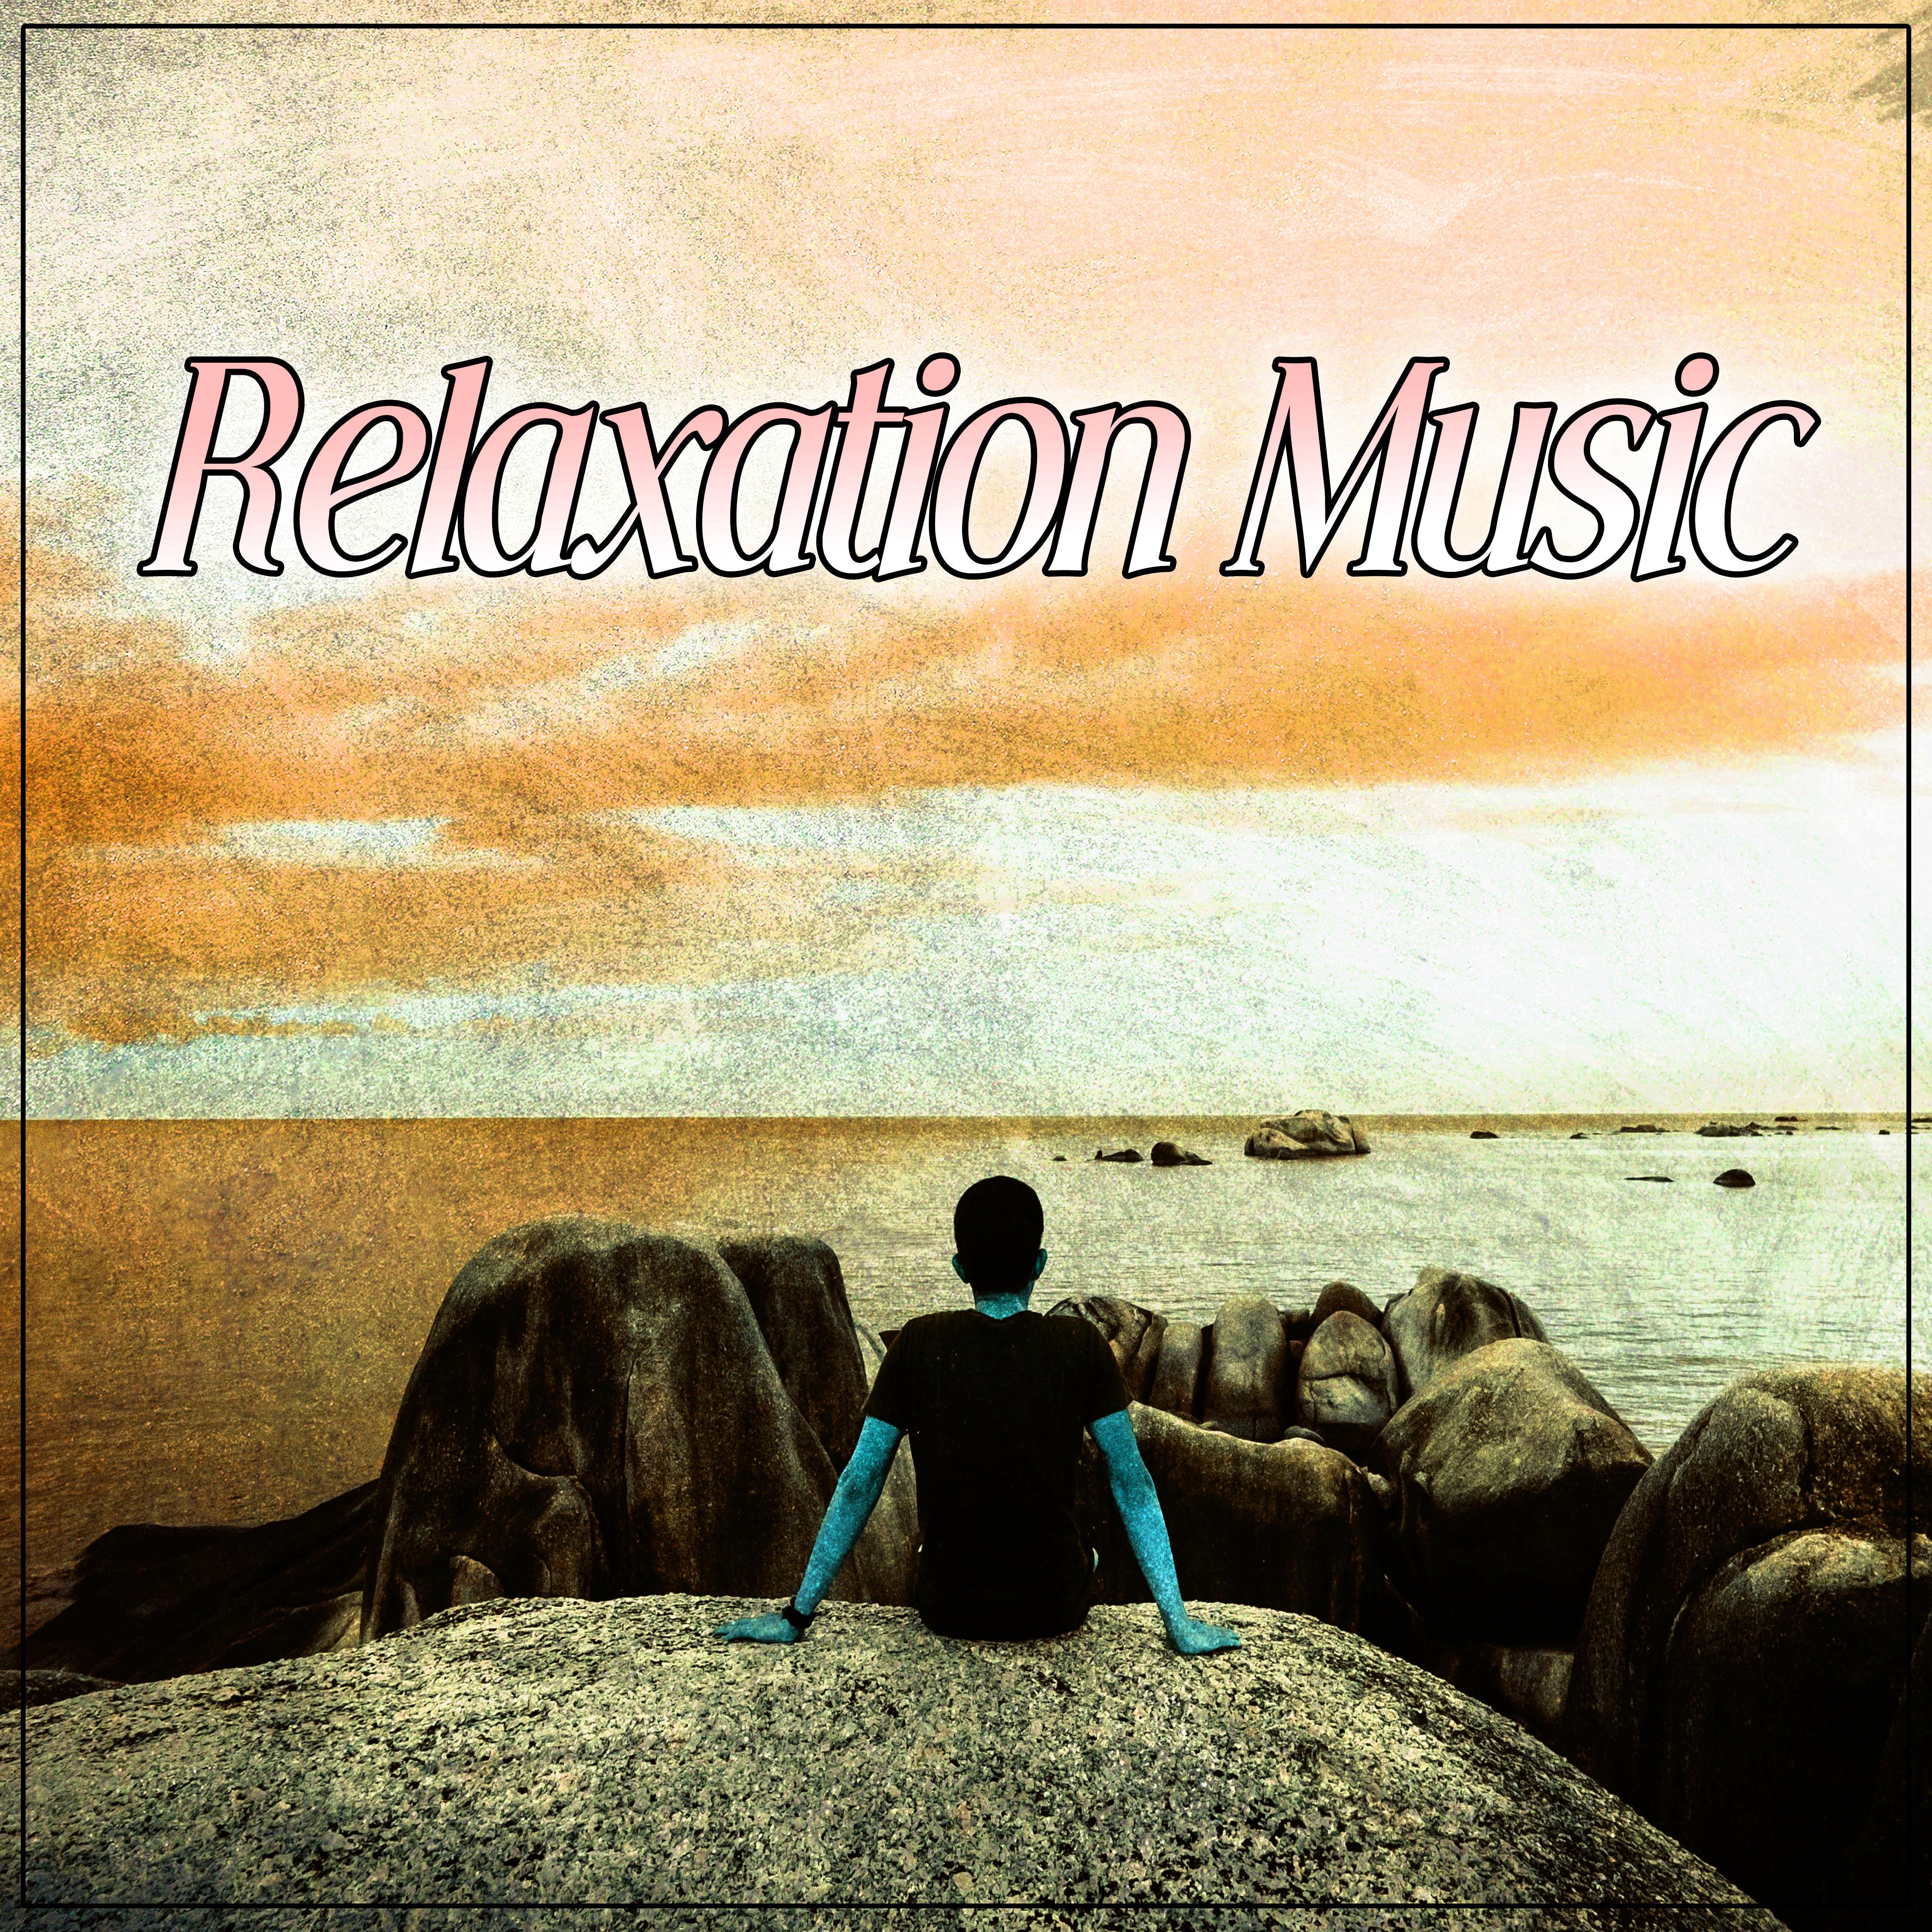 Relaxation Music – Nature Sounds, Relaxing Sounds, Memory, Focus, Contemplation, Meditation, Yoga